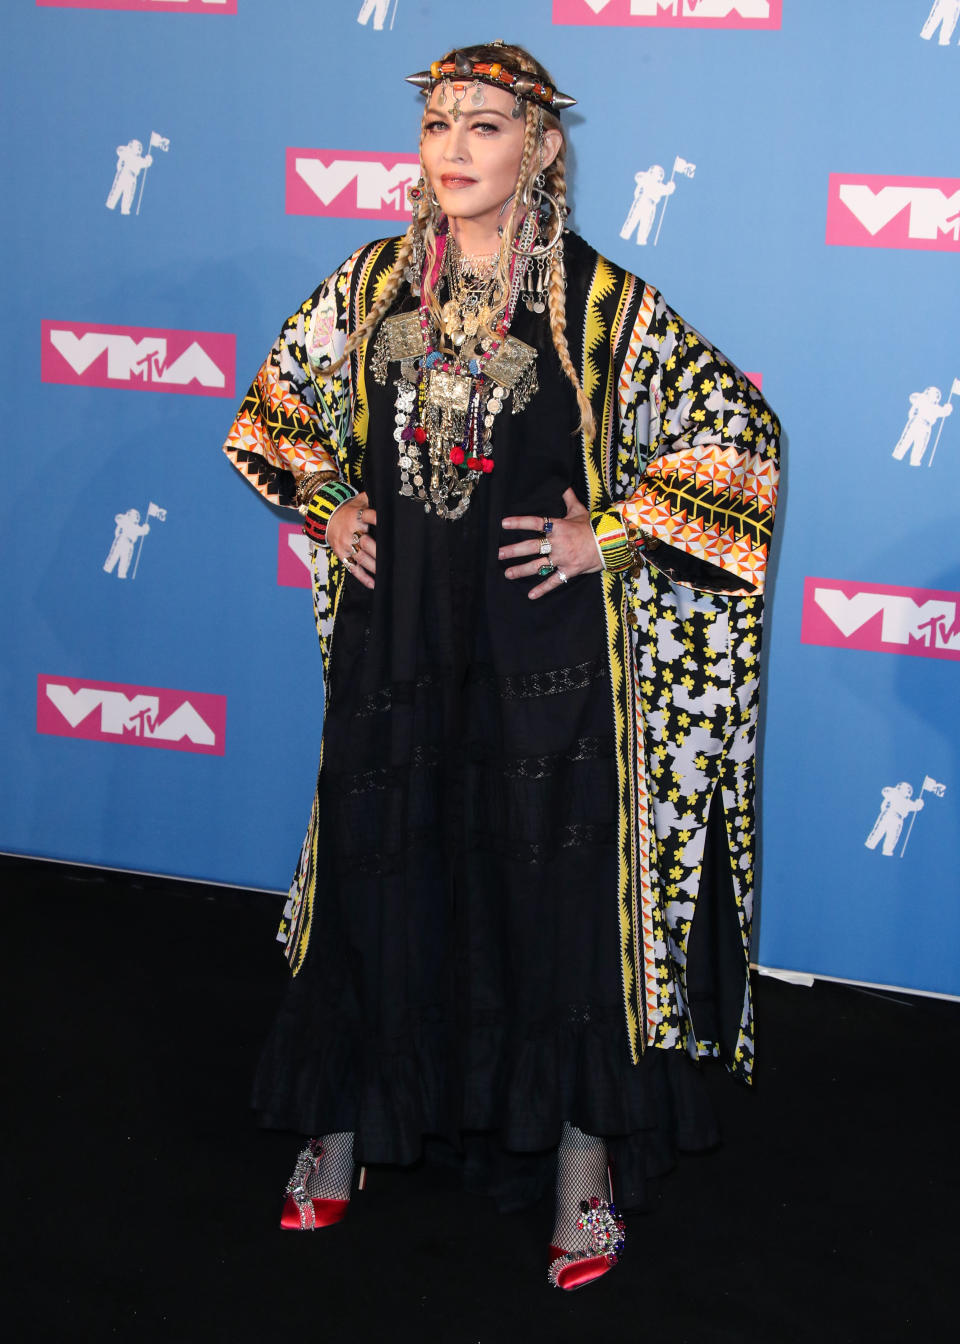 MANHATTAN, NEW YORK CITY, NY, USA - AUGUST 20: 2018 MTV Video Music Awards held at the Radio City Music Hall on August 20, 2018 in Manhattan, New York City, New York, United States. 20 Aug 2018 Pictured: Madonna. Photo credit: Xavier Collin/Image Press Agency / MEGA TheMegaAgency.com +1 888 505 6342 (Mega Agency TagID: MEGA264787_001.jpg) [Photo via Mega Agency]